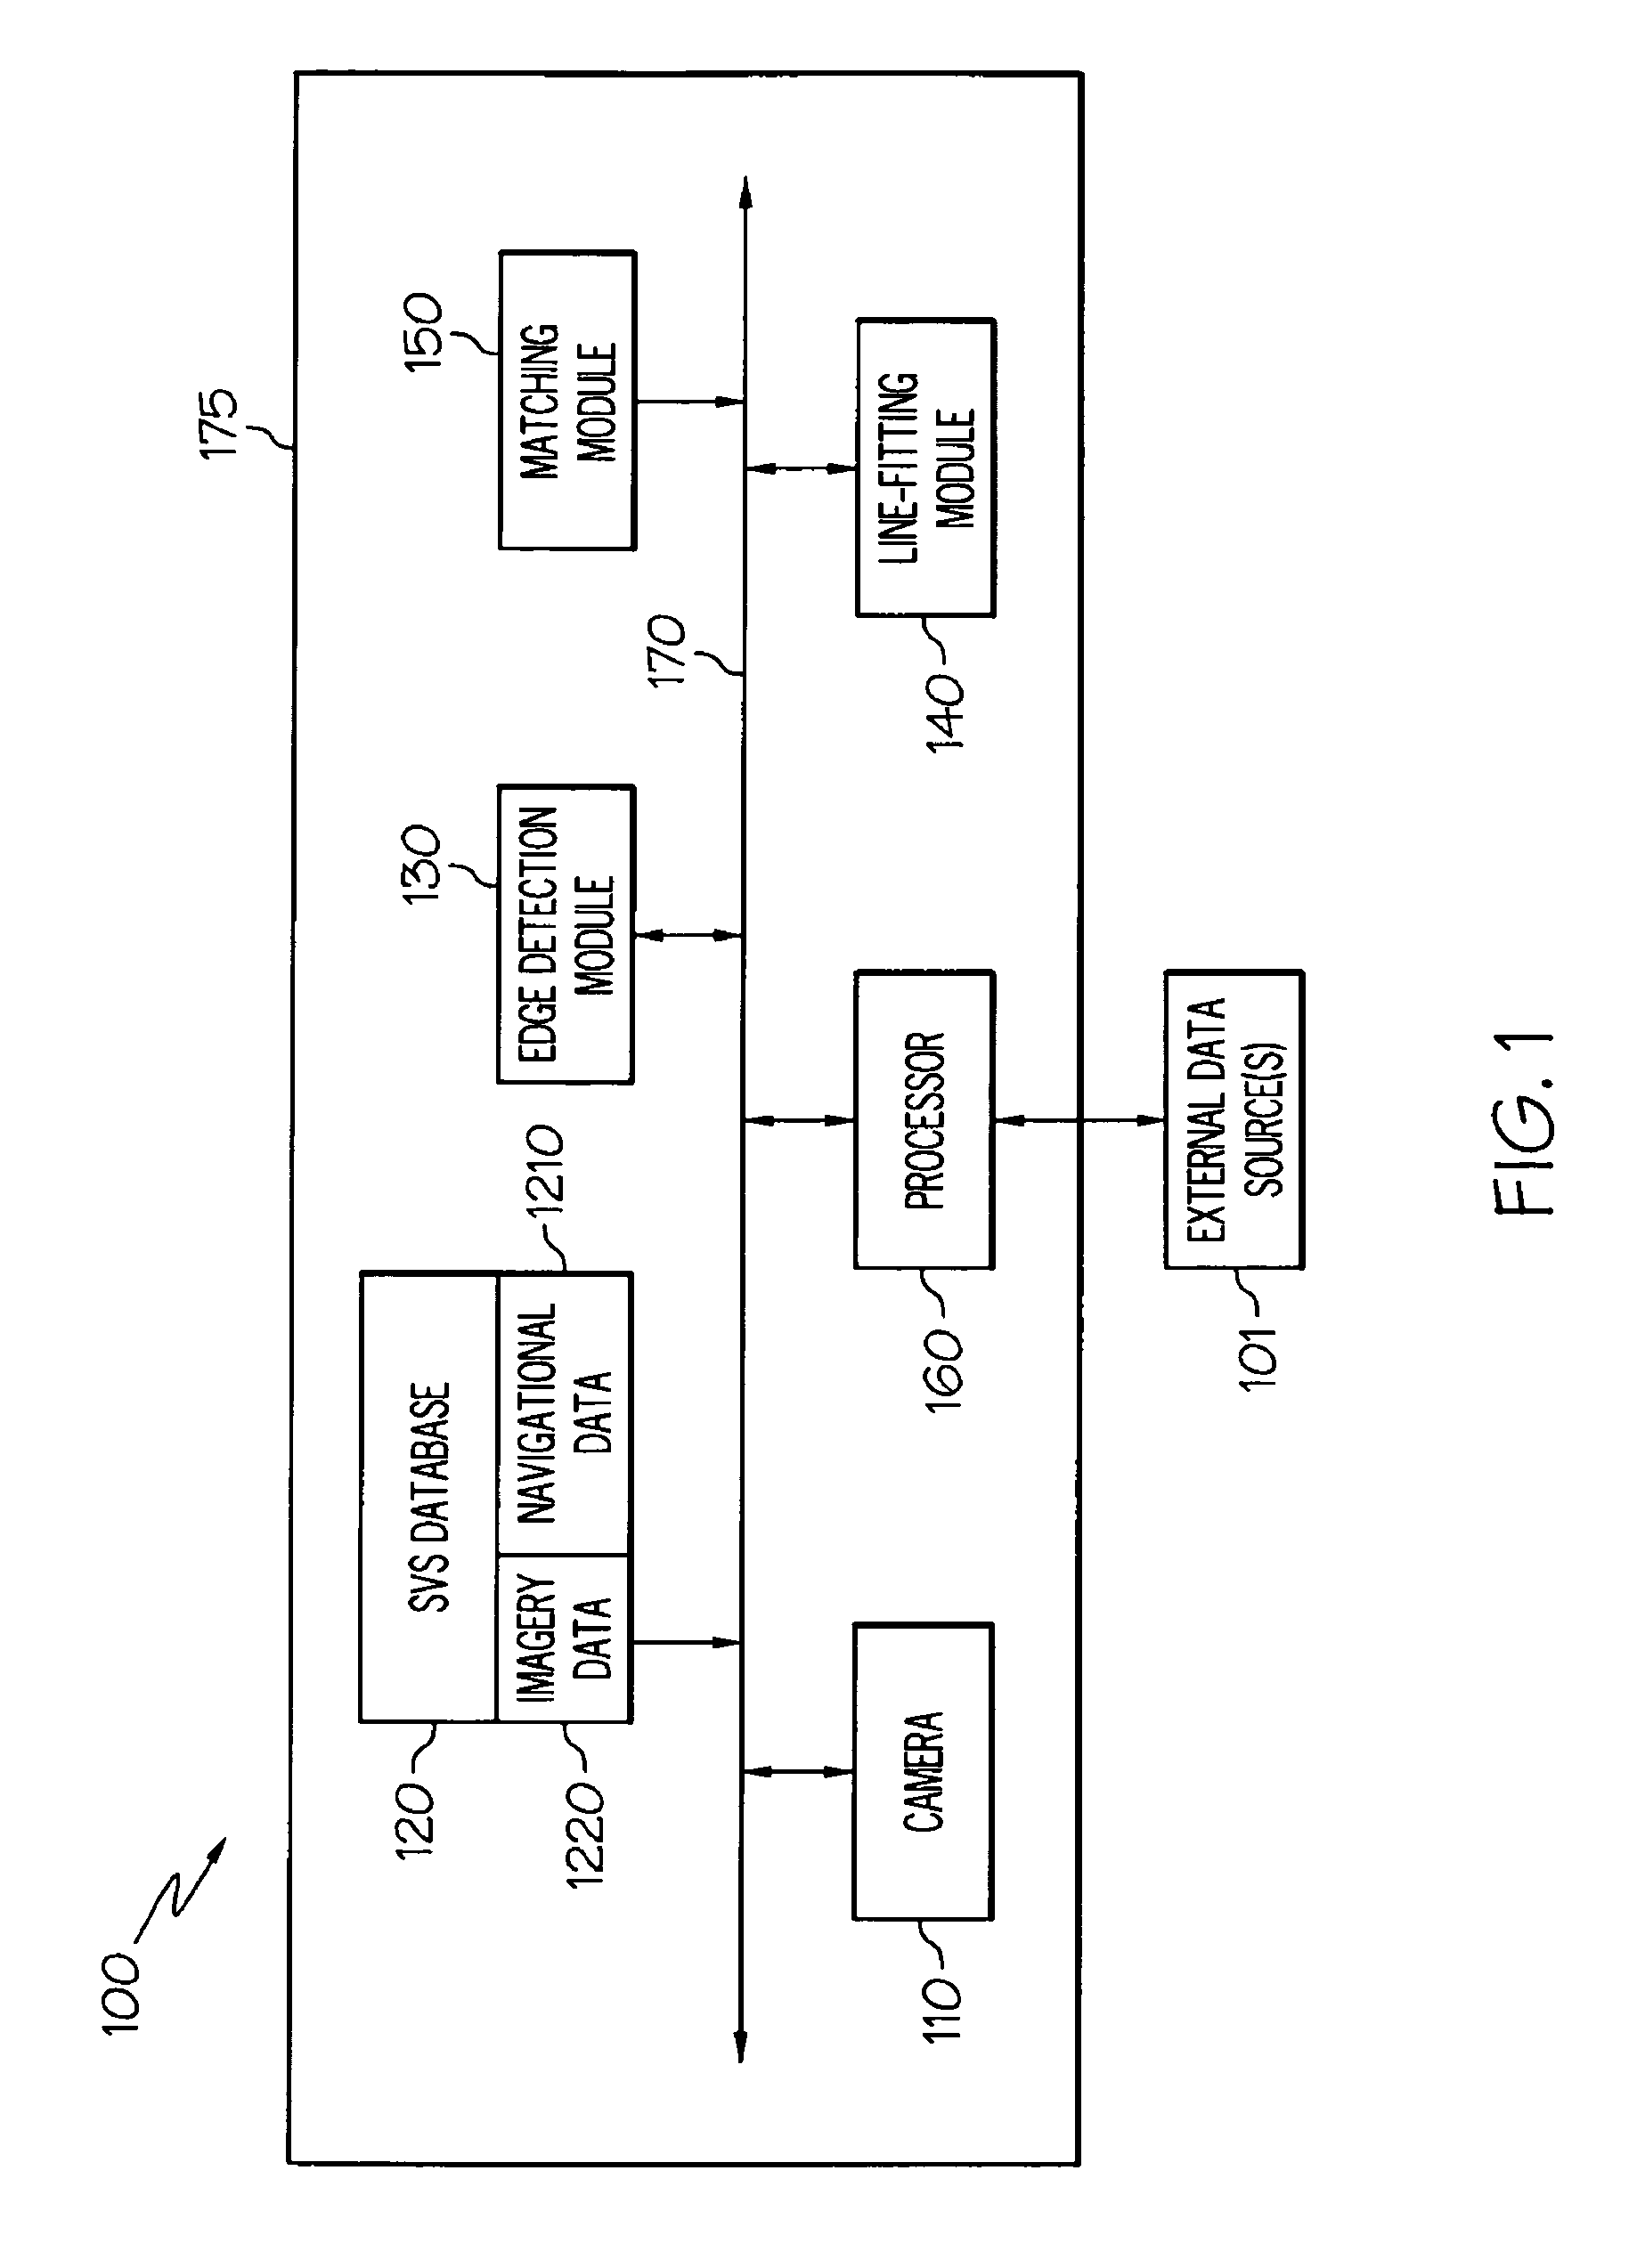 Systems and methods for recognizing a target from a moving platform